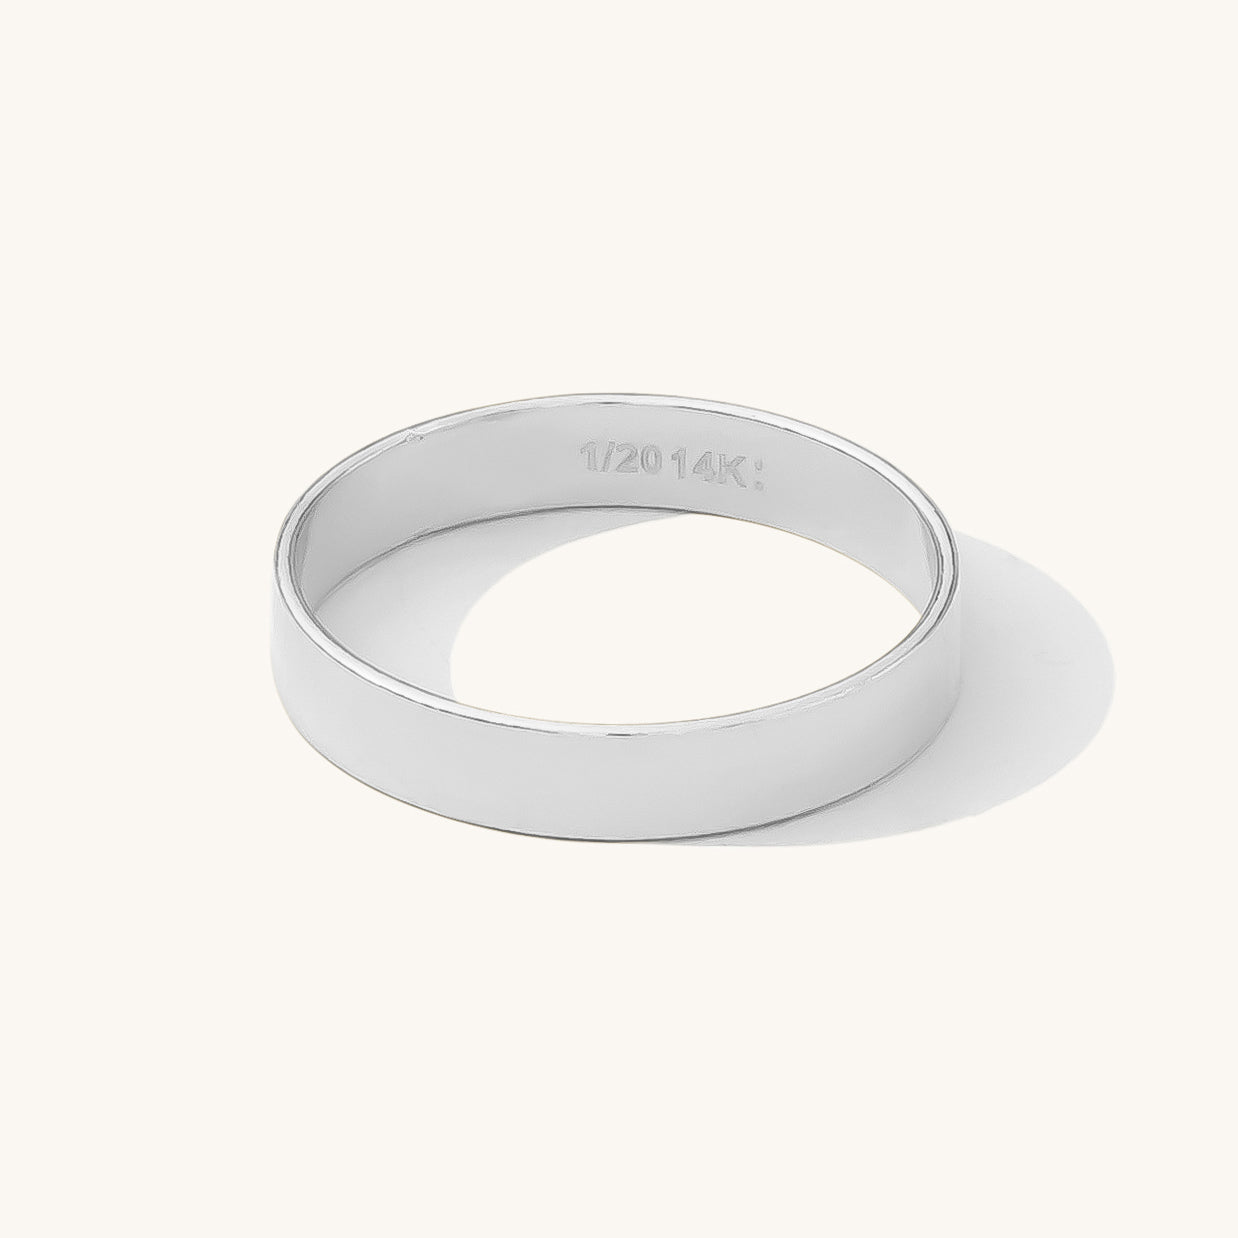 Thick Flat Band Ring | Simple & Dainty Jewelry